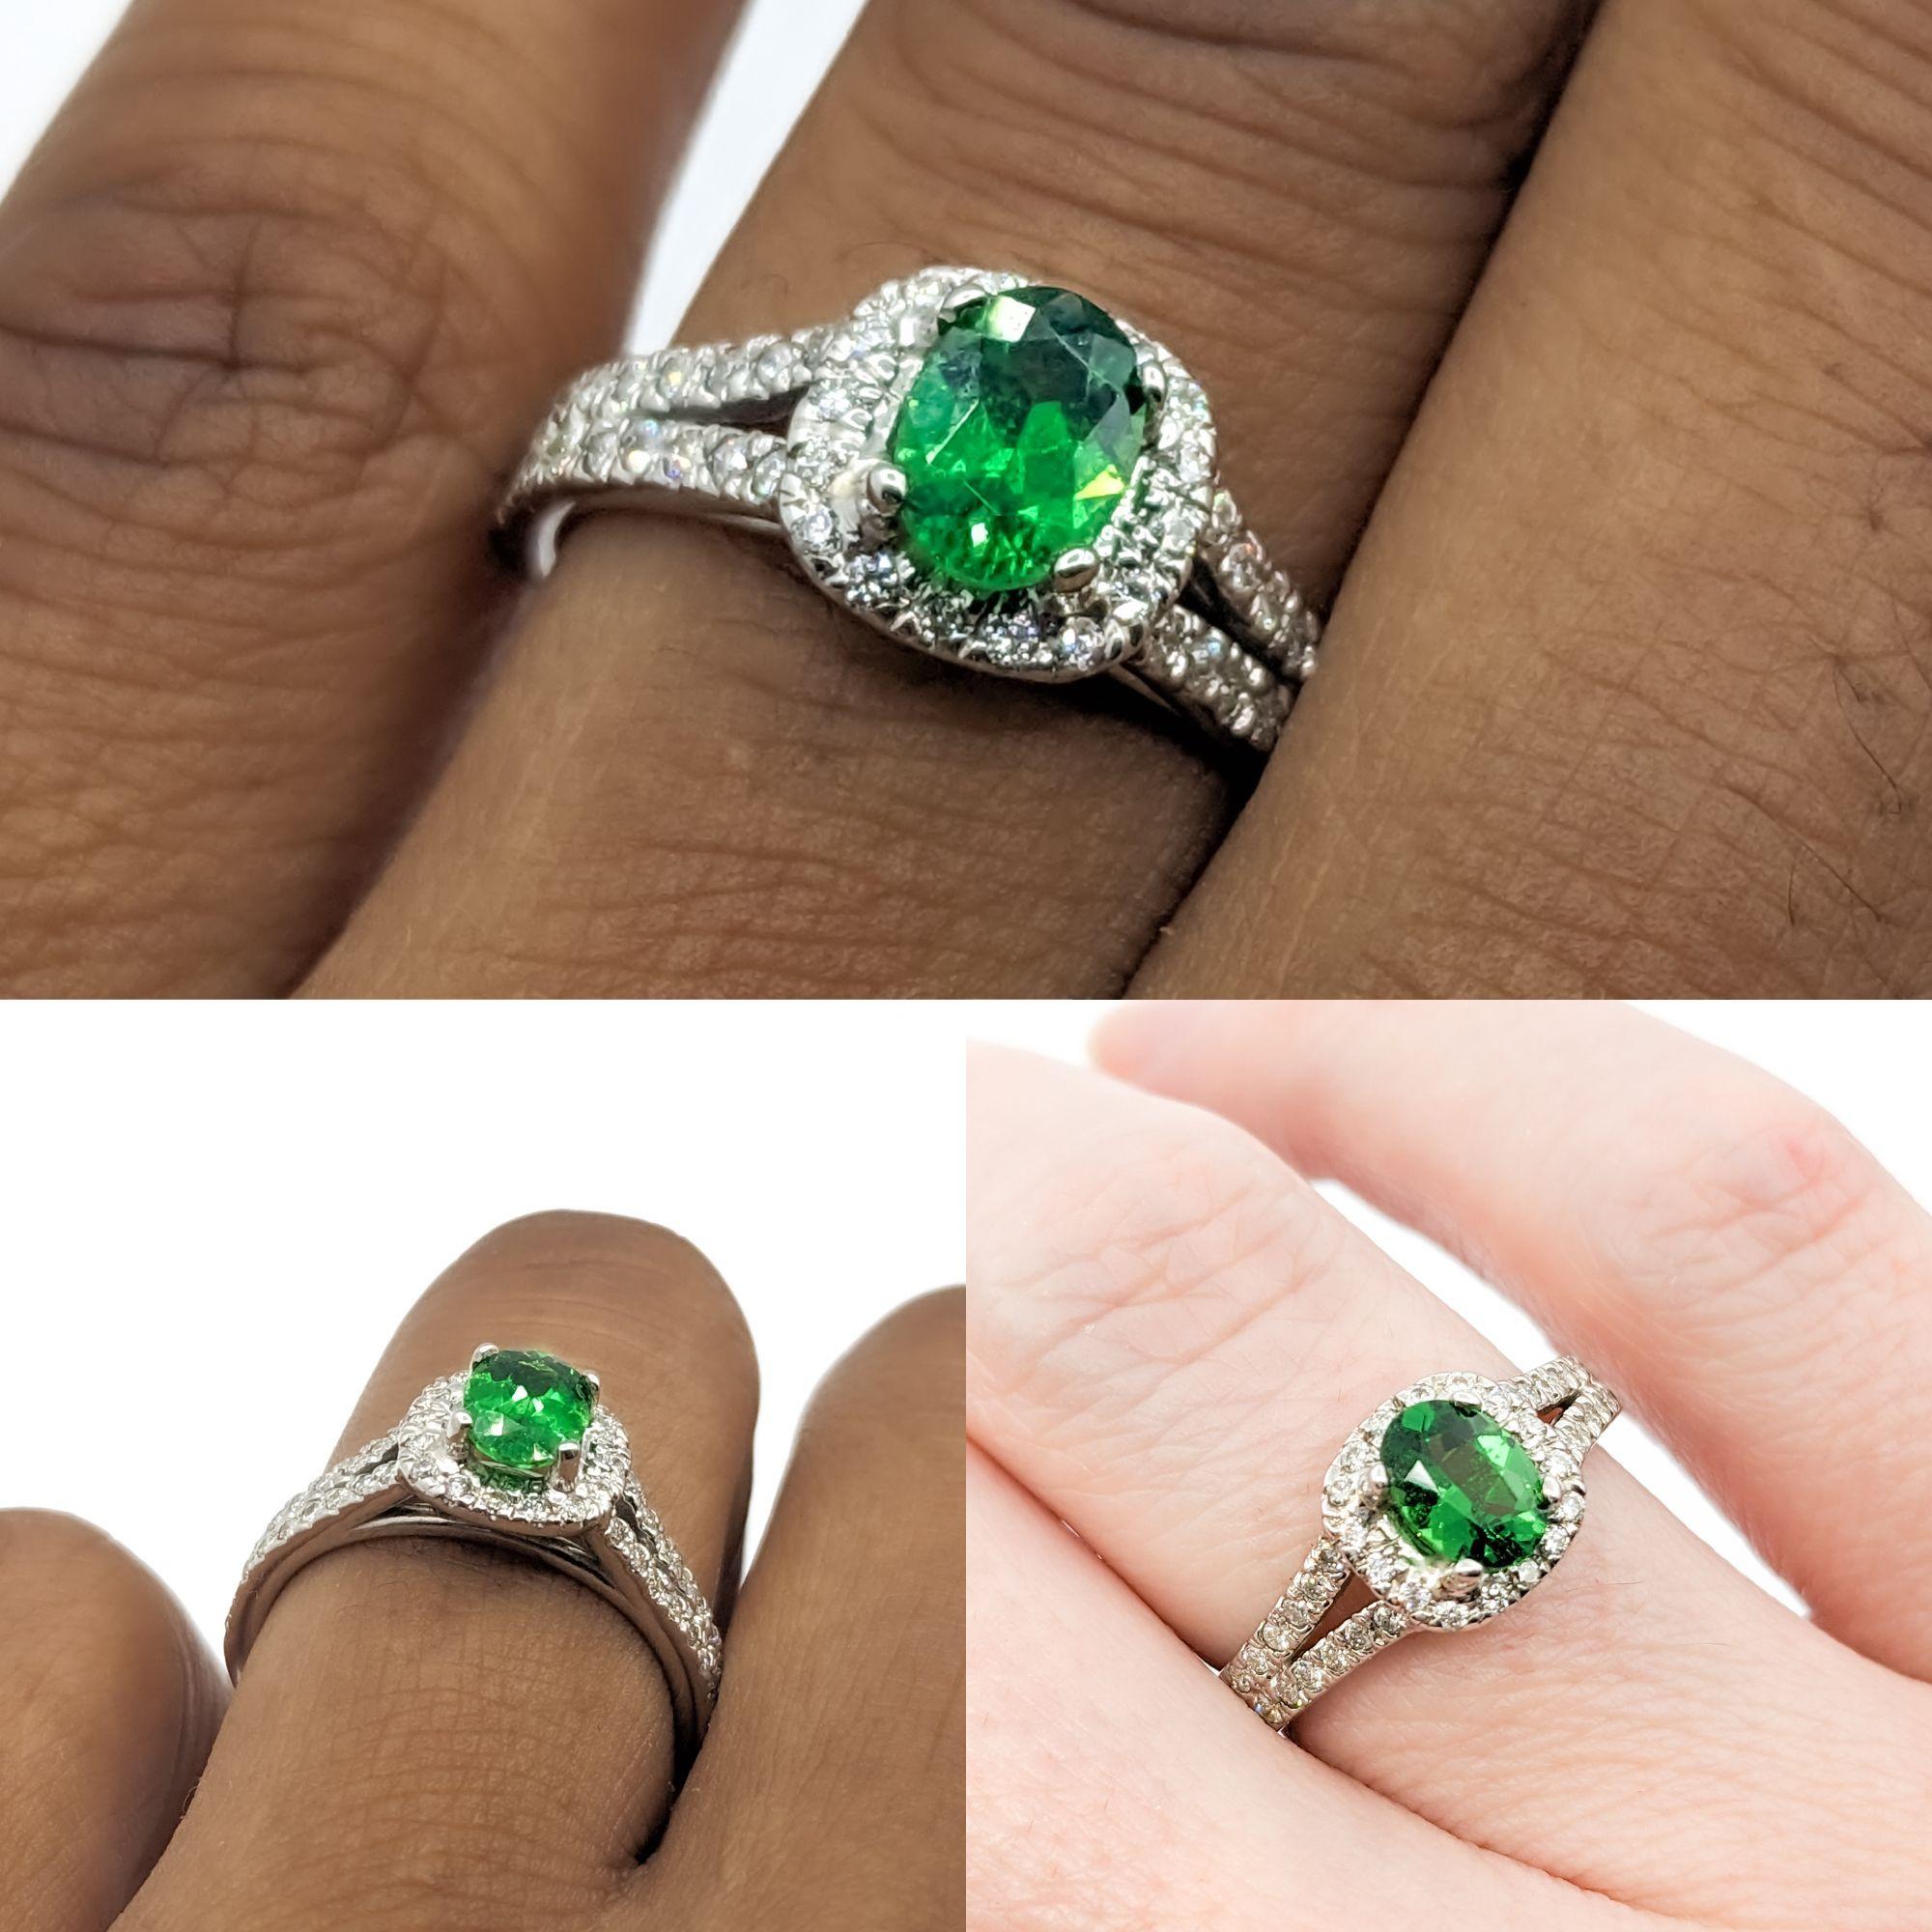 18kt Tsavorite Garnet & Diamond Ring

This stunning ring is expertly crafted from 14kt white gold and adorned with 0.50 carats total weight of glittering diamonds that boast an SI2 clarity grade and an H color grade. Additionally, the ring showcases